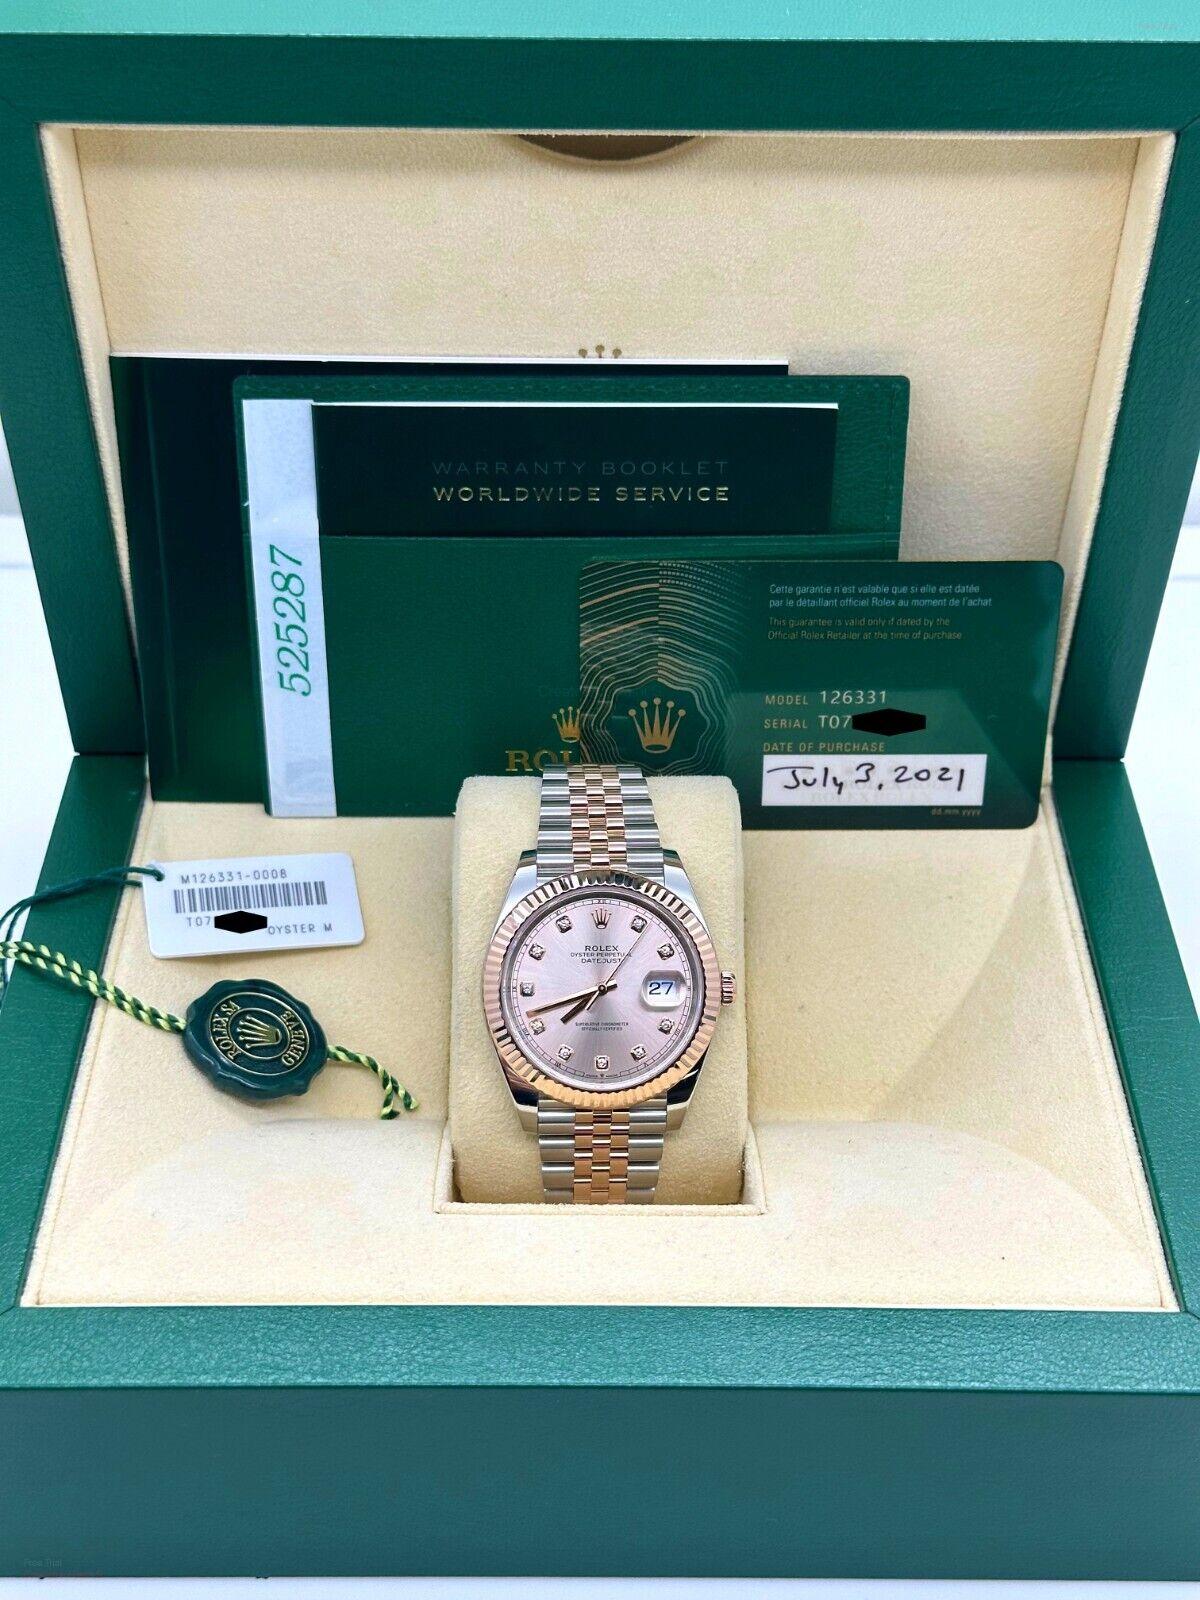 Style Number: 126331

Serial: T0705***

Year: 2021

Model: Datejust 41 

Case Material: Stainless Steel 

Band: 18K Rose Gold & Stainless Steel 

Bezel: 18 Rose Gold 

Dial: Original Sundust Diamond Dial 

Face: Sapphire Crystal 

Case Size: 41mm